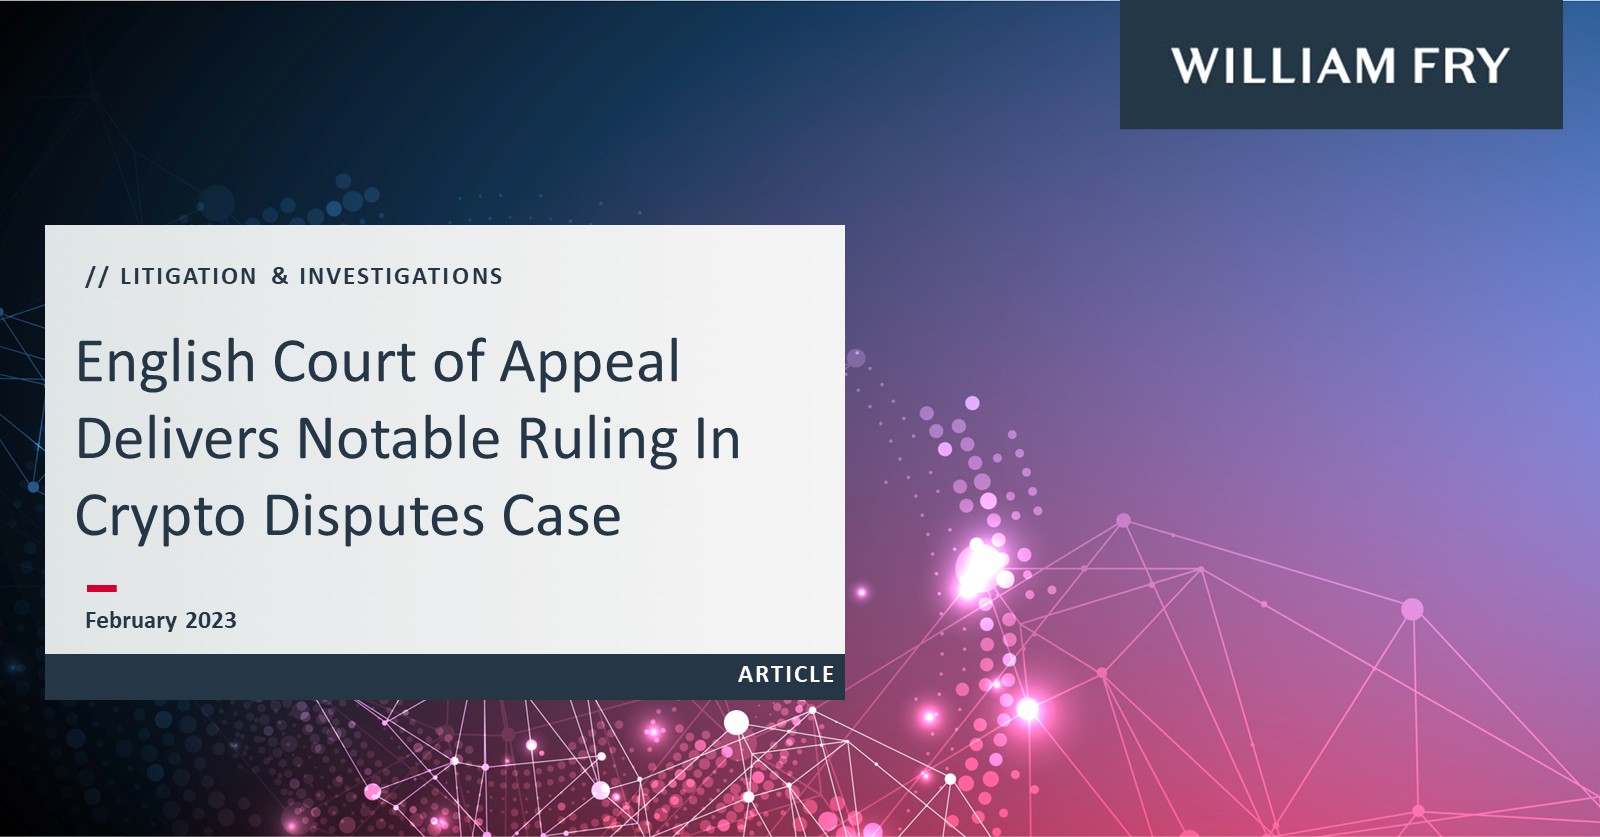 An English Court of Appeal recently overturned a High Court decision regarding issues surrounding the duty of care owed by blockchain developers to cryptocurrency owners in cases of crypto fraud.